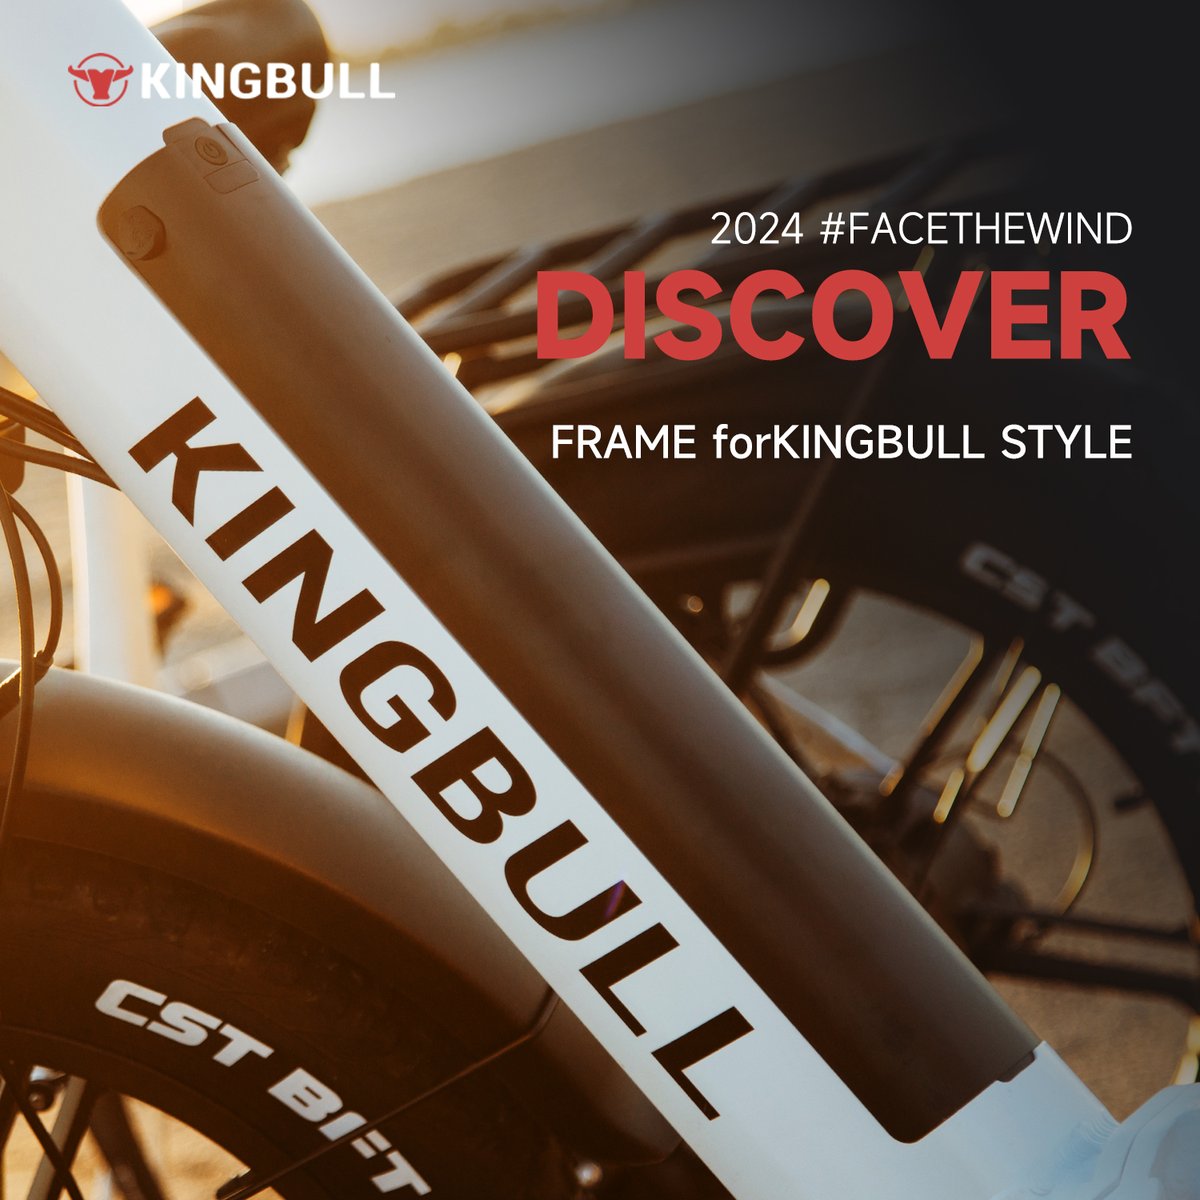 #Discover your city with Kingbull Discover, the most minimalist design in black and white color scheme, in this blooming season🌳

Last 2 days to launch🚲

#FaceTheWind #KingbullBike #ElectricBike #NewLaunch